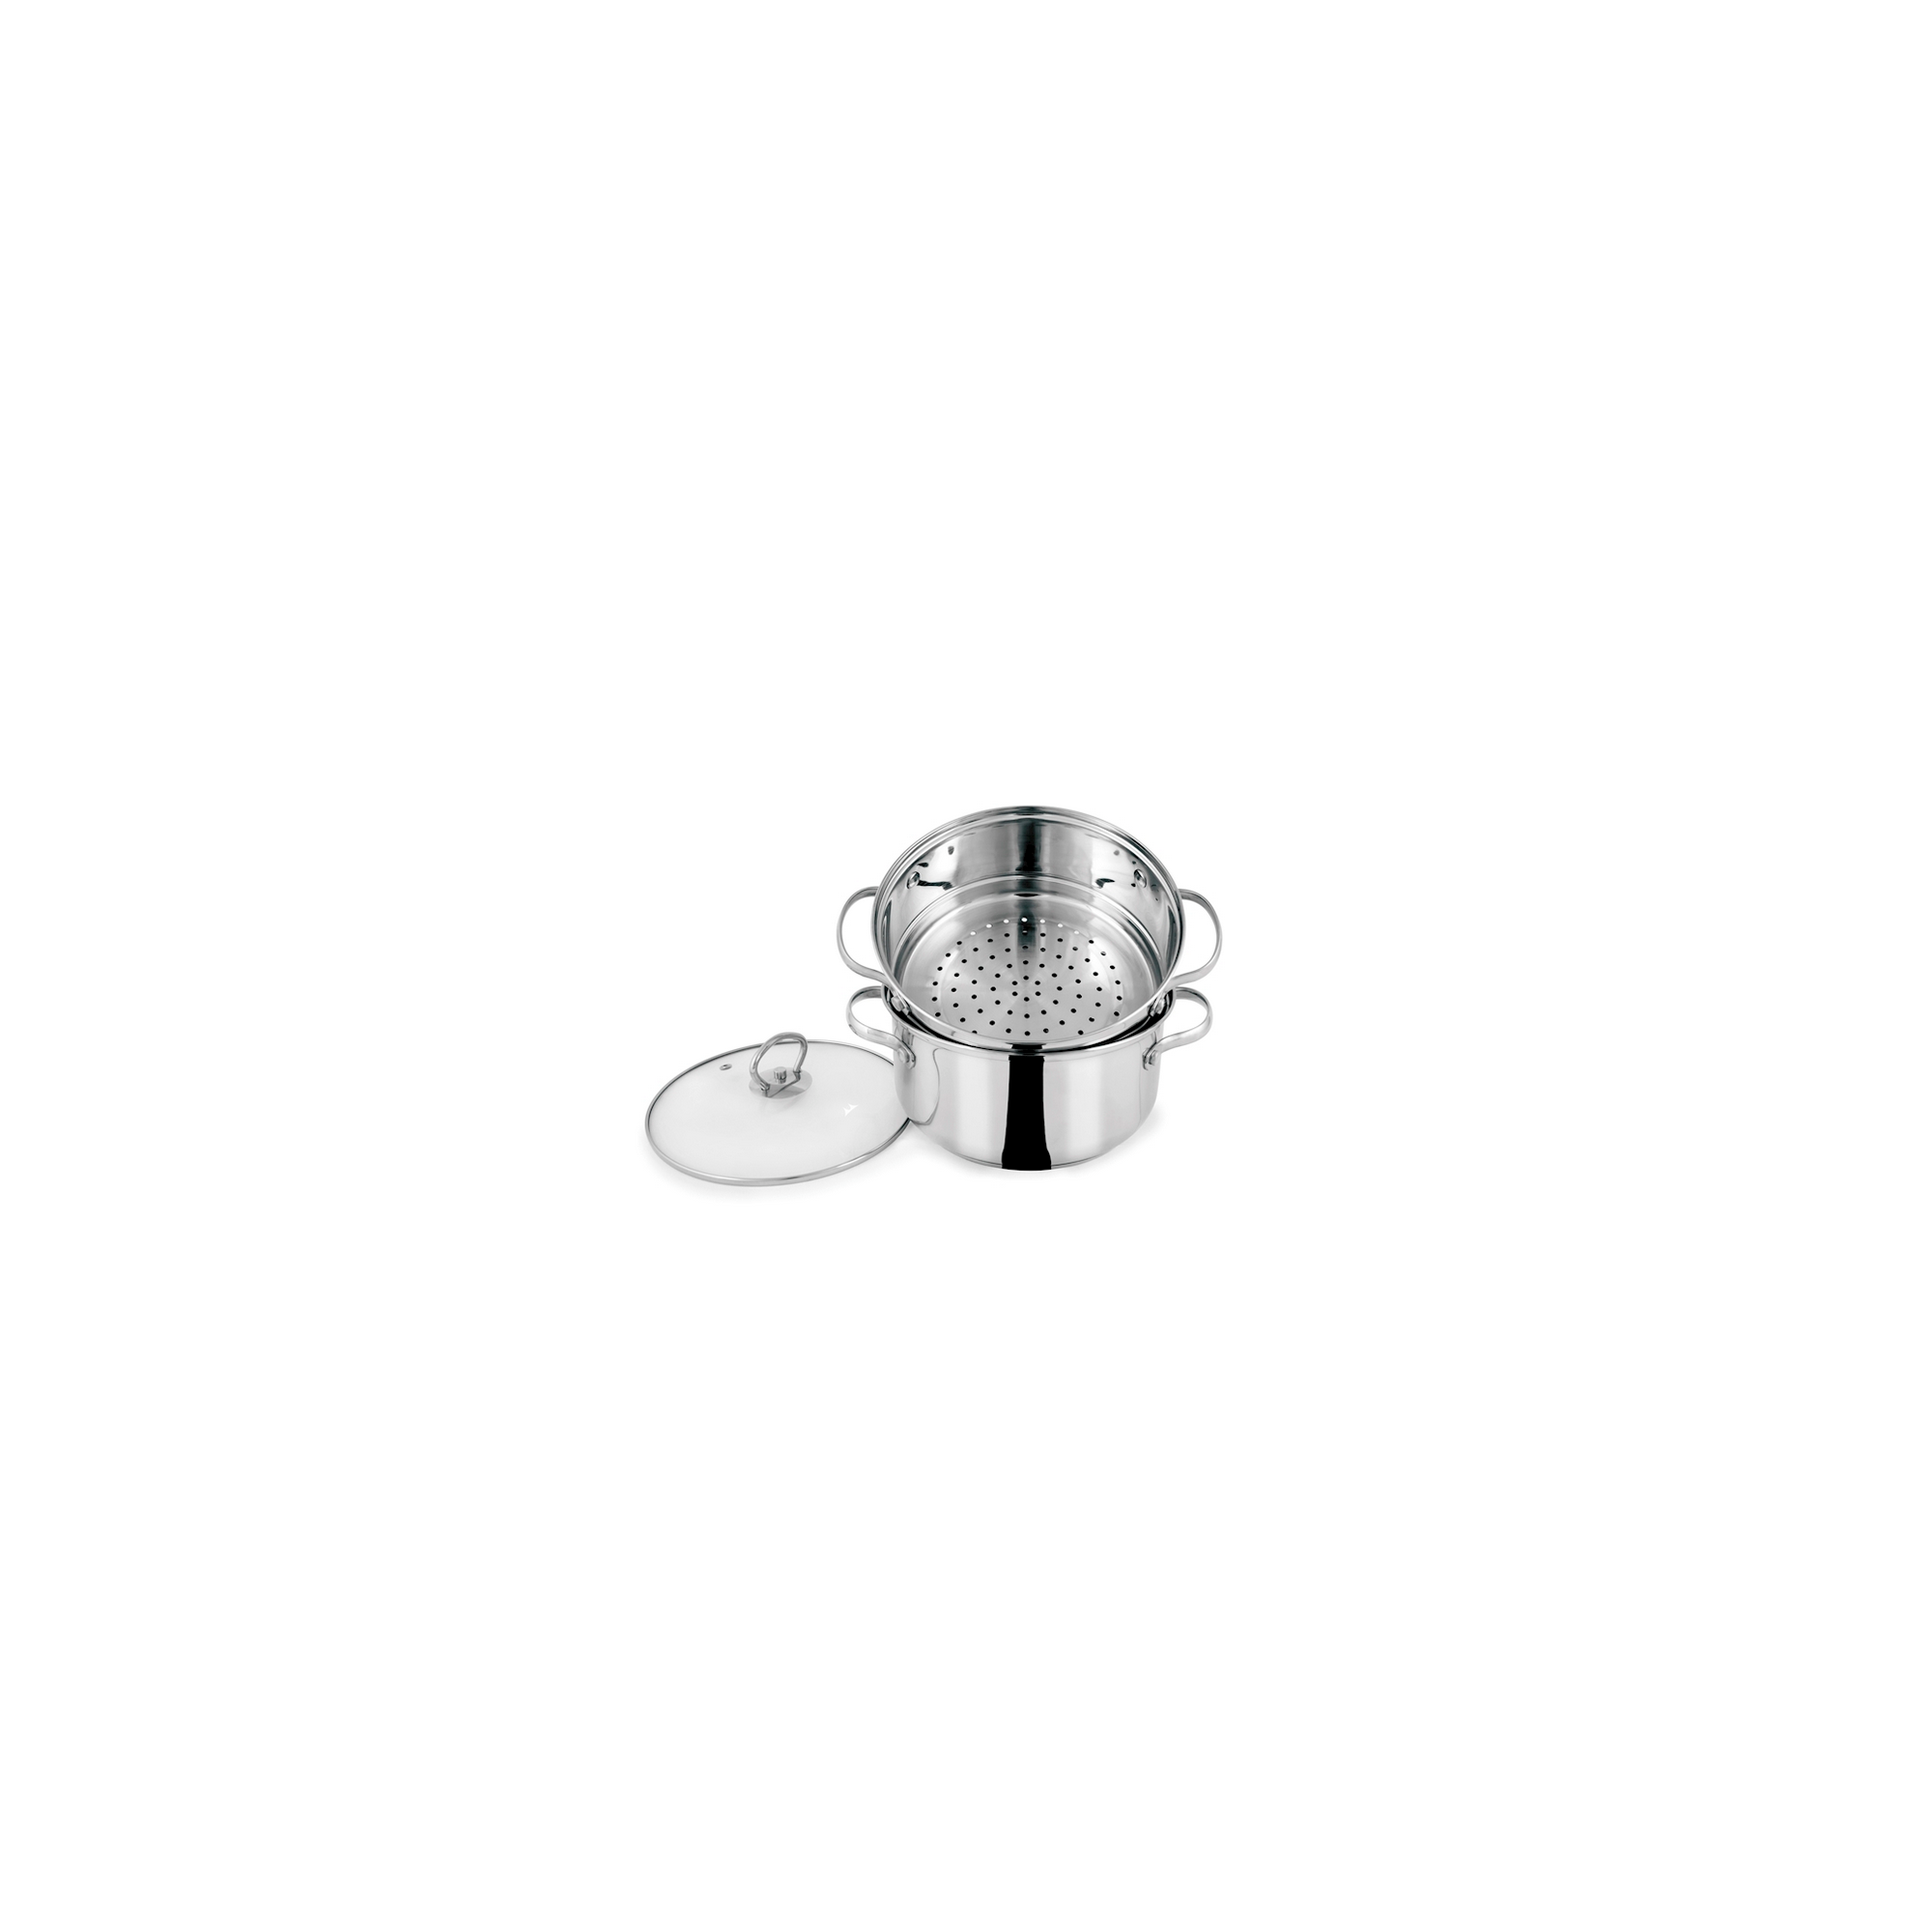 Stainless steel collection Pendeford Vaporiera in acciaio inox 20 cm 3 piani 